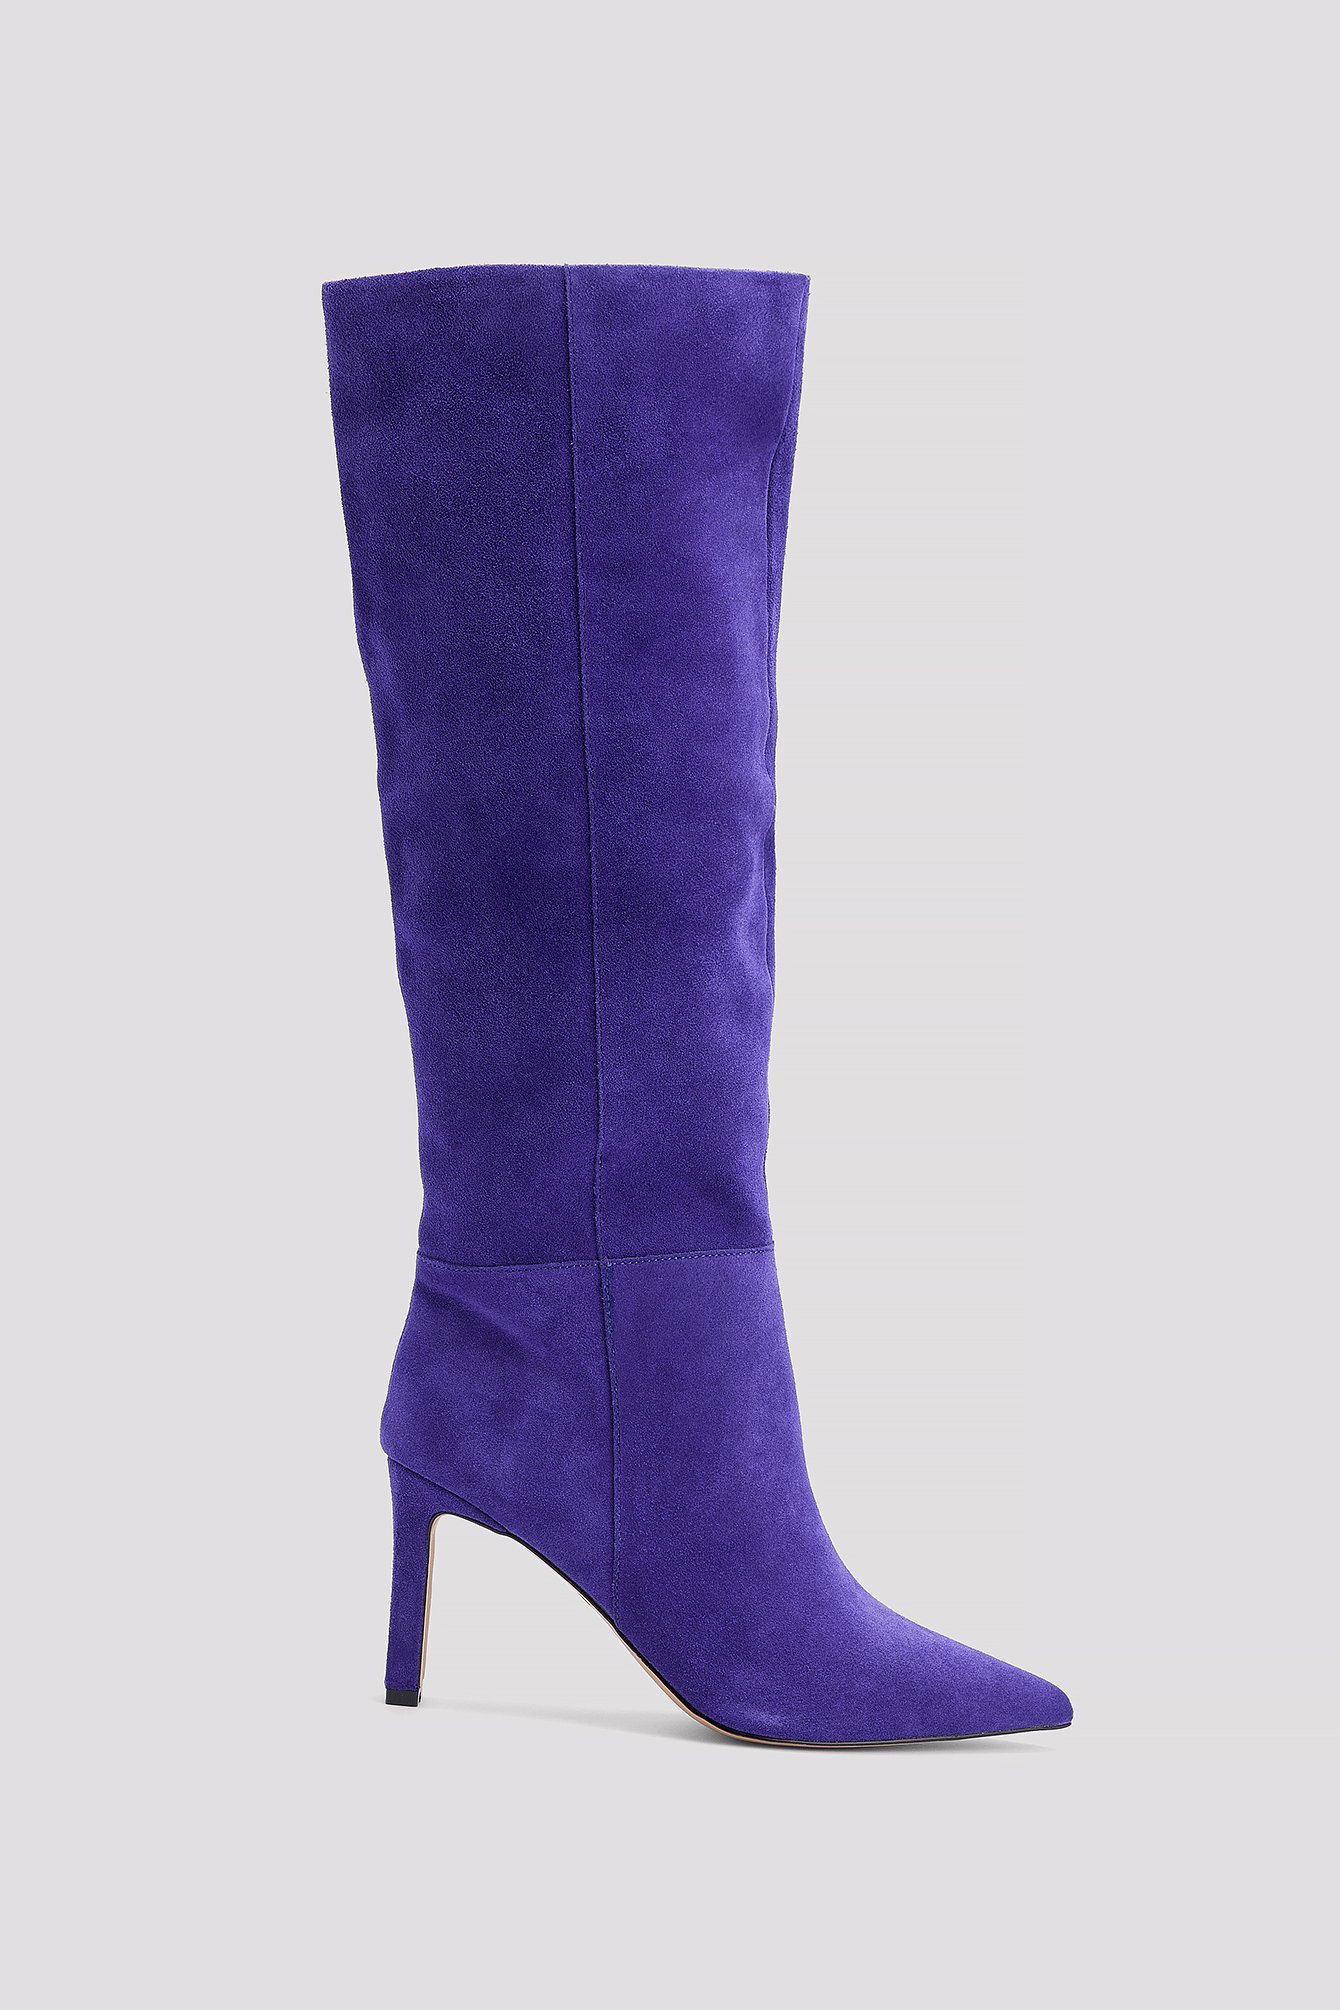 NA-KD Shoes Suede Stiletto Boots - Purple